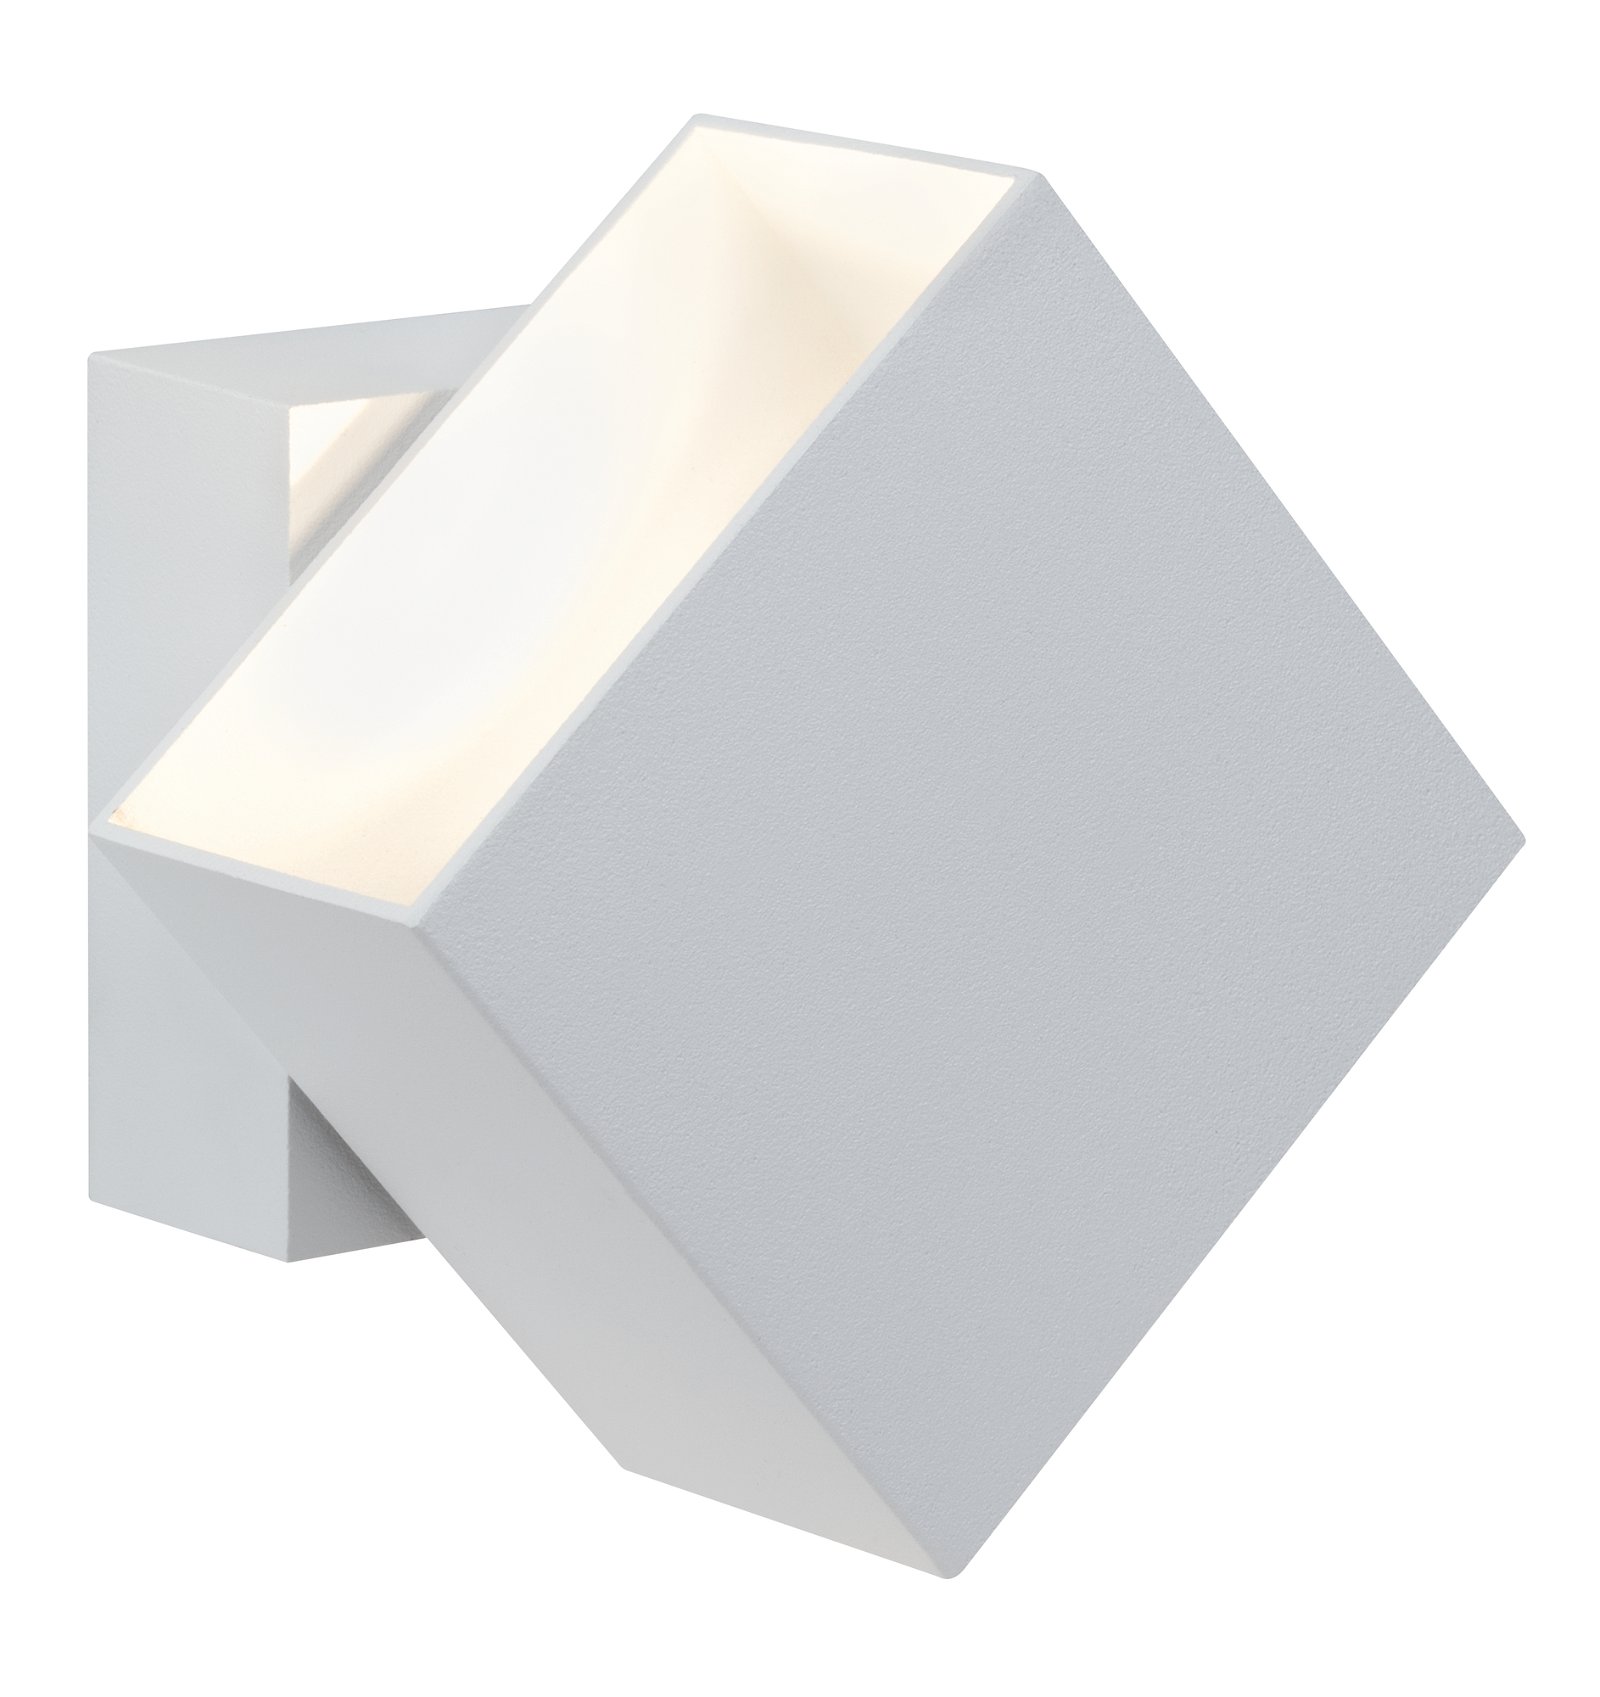 2x3,5W Cybo 2700K White wall 100x100mm square LED luminaire / 355lm 355lm 230V Exterior House IP65